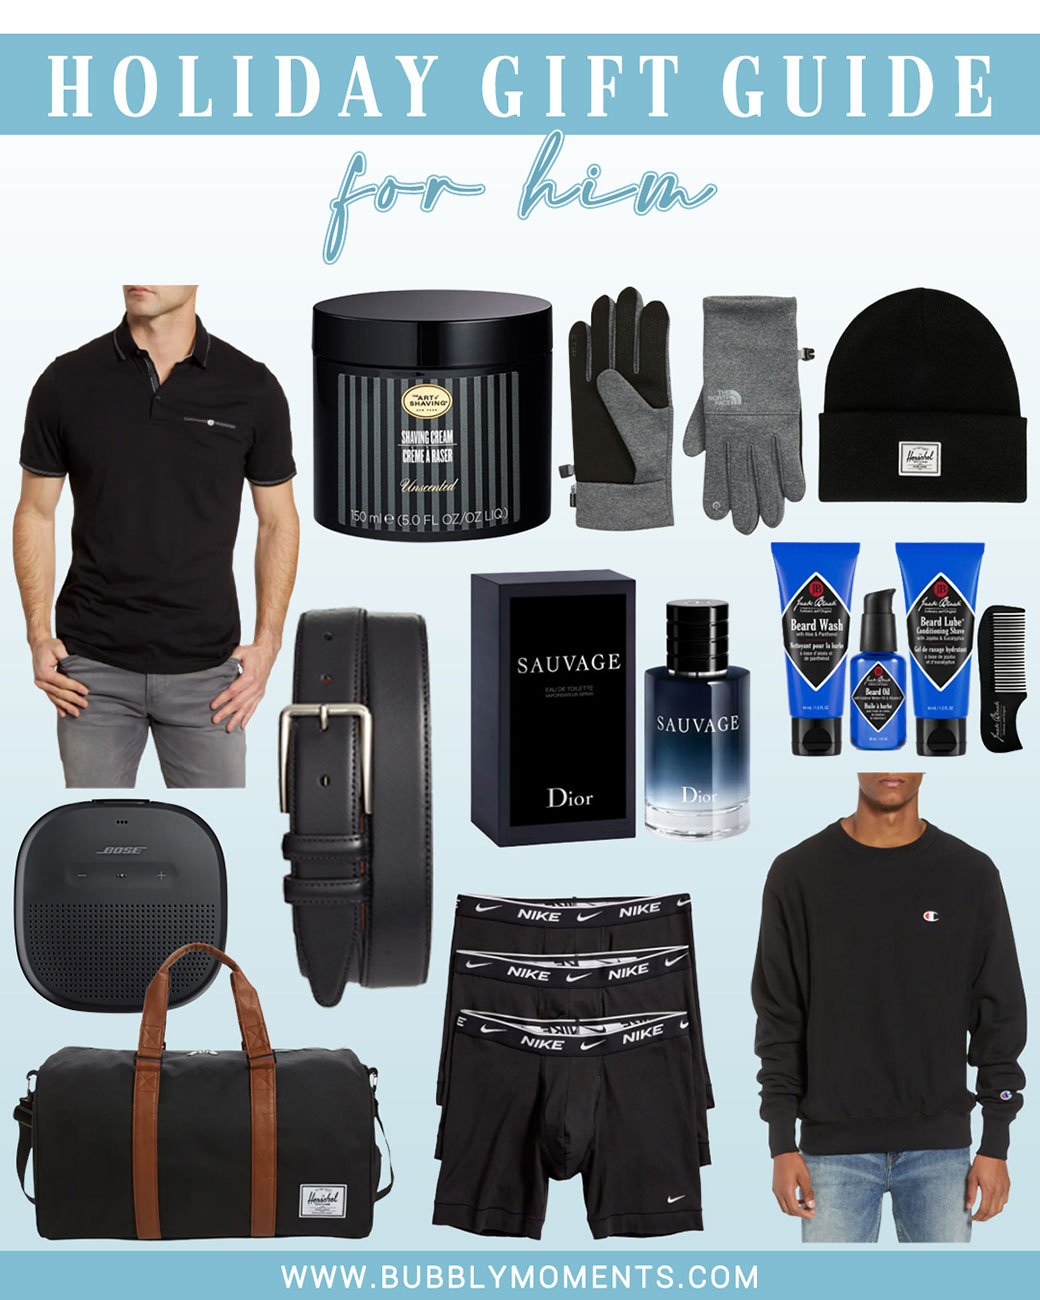 Gifts for Boys Get 50% off | Best Gift Ideas for Boys/Men - Winni